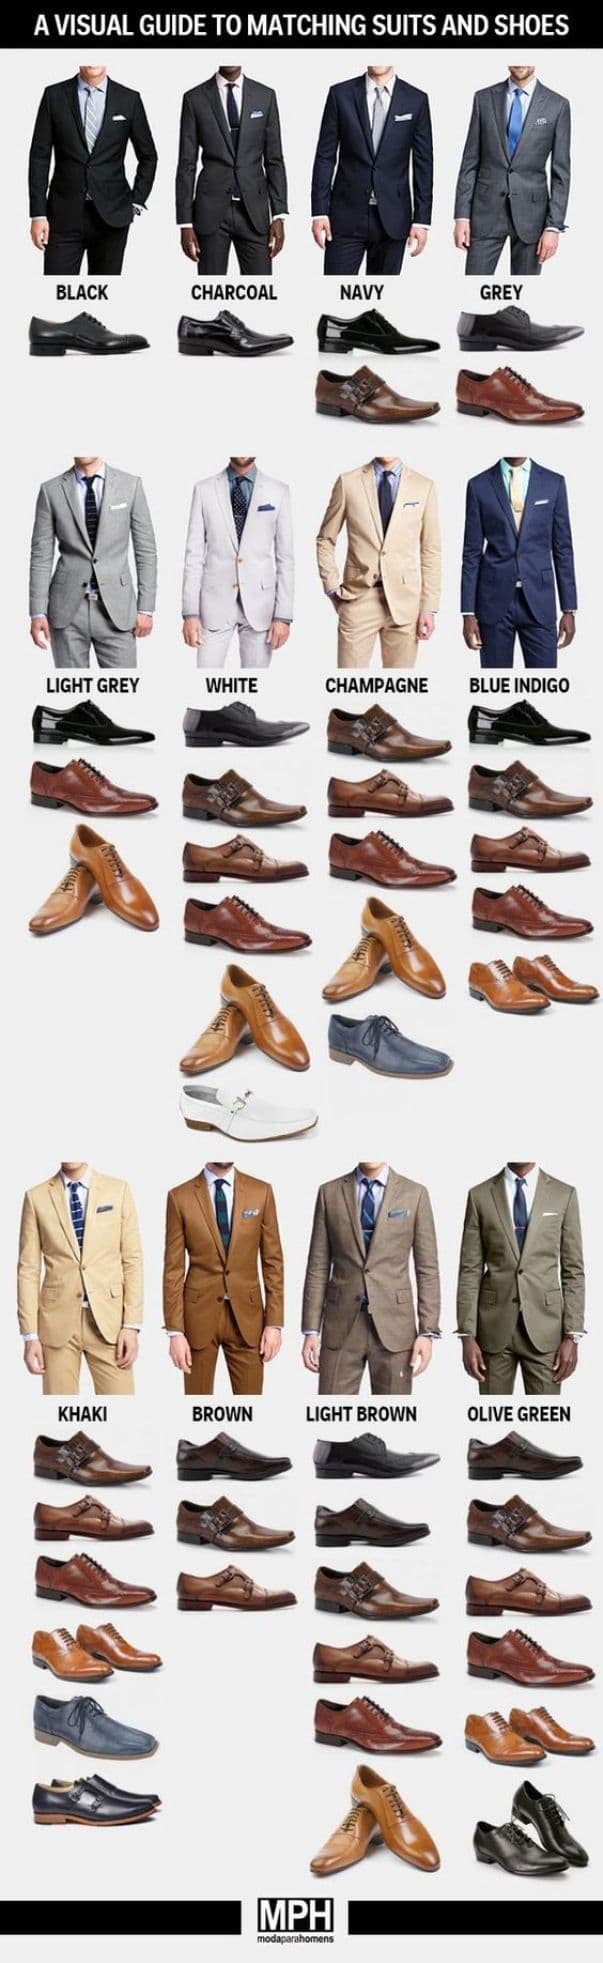 Matching Suits And Dress Shoe Colors